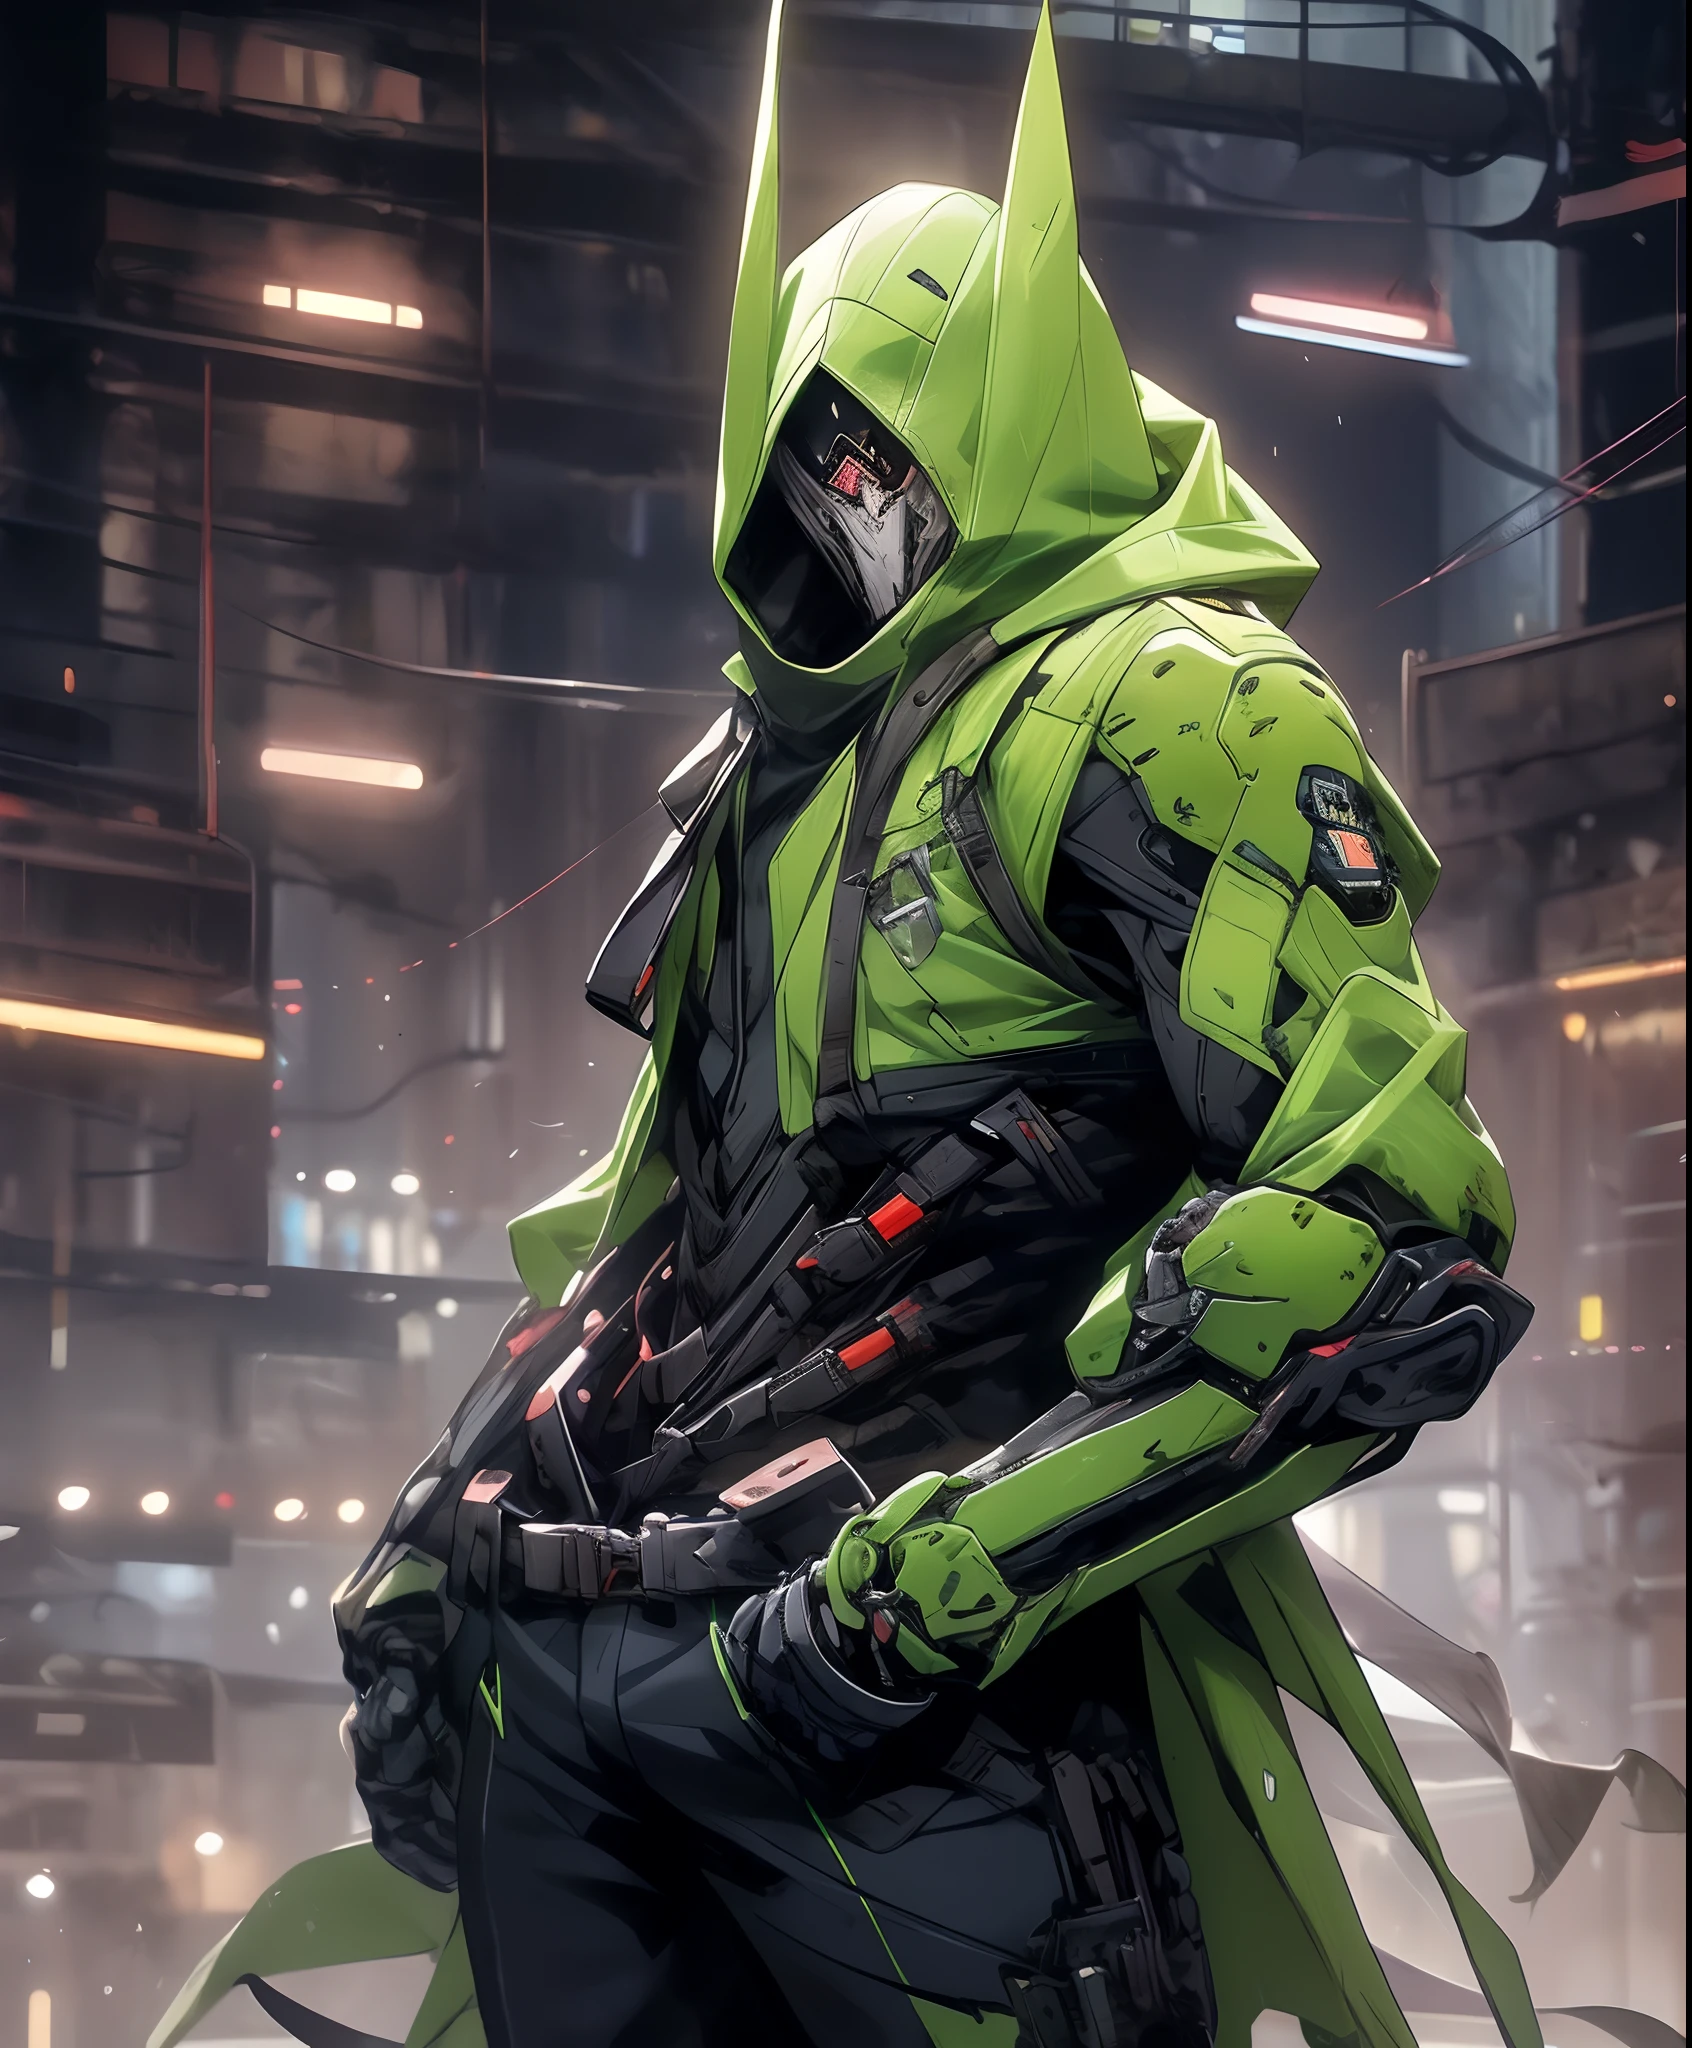 a man in a green jacket and black pants standing in a dark room, wearing cultist green robe, green attire, character from mortal kombat, as a character in tekken, fighting game character, cyberpunk assassin, green hooded mage, cyberpunk outfits, green clothes, the green ninja, wearing leather assassin armor, an edgy teen assassin, cool green jacket, cyberpunk street goon